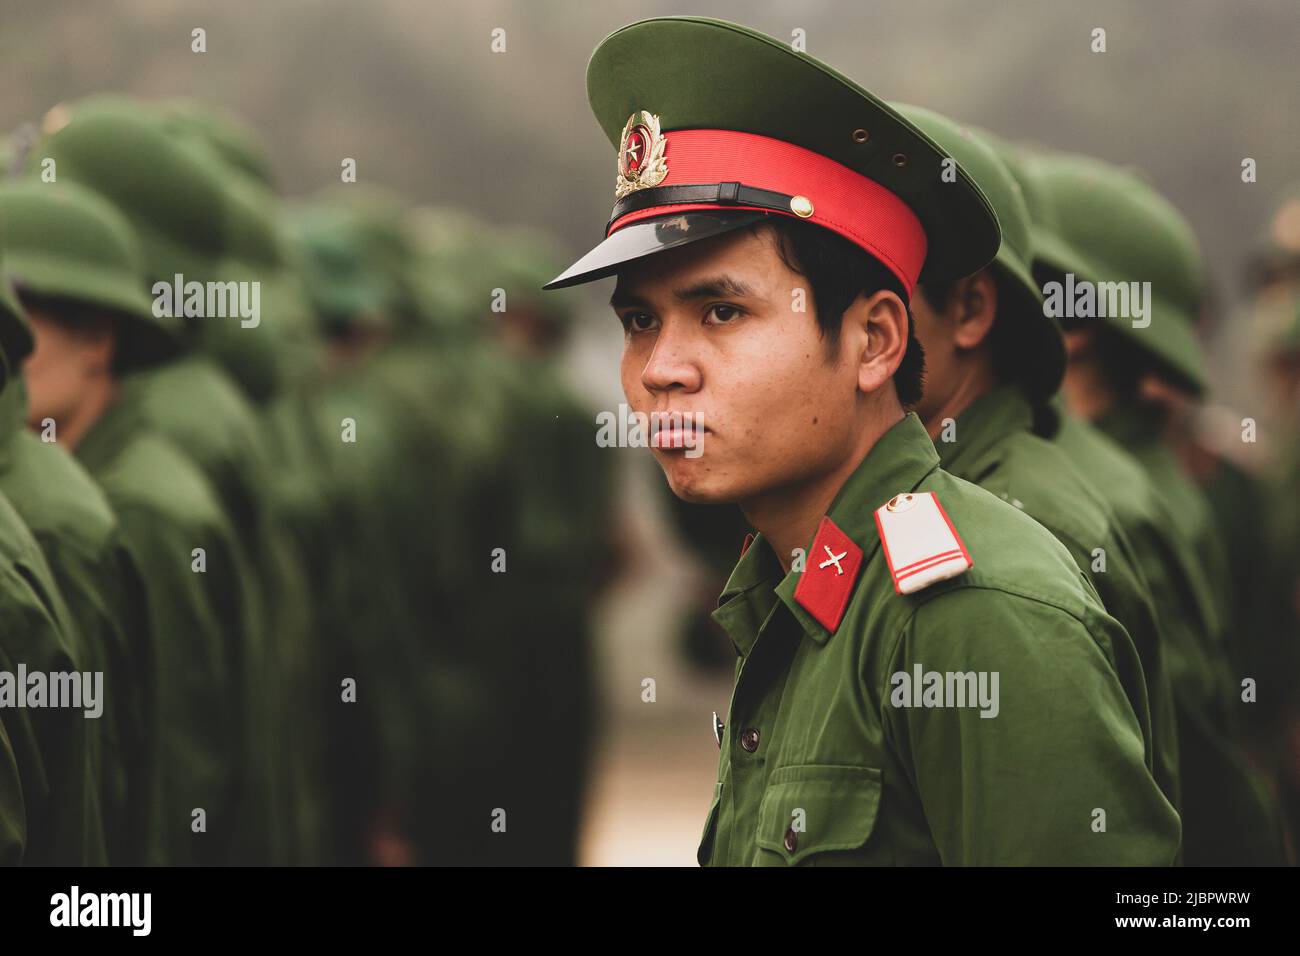 Dien Bien Phu, Vietnam - FEBRUARY 26, 2012: A group of young Vietnamese soldiers during a site visit program of Vietnamese Military Academies. Stock Photo